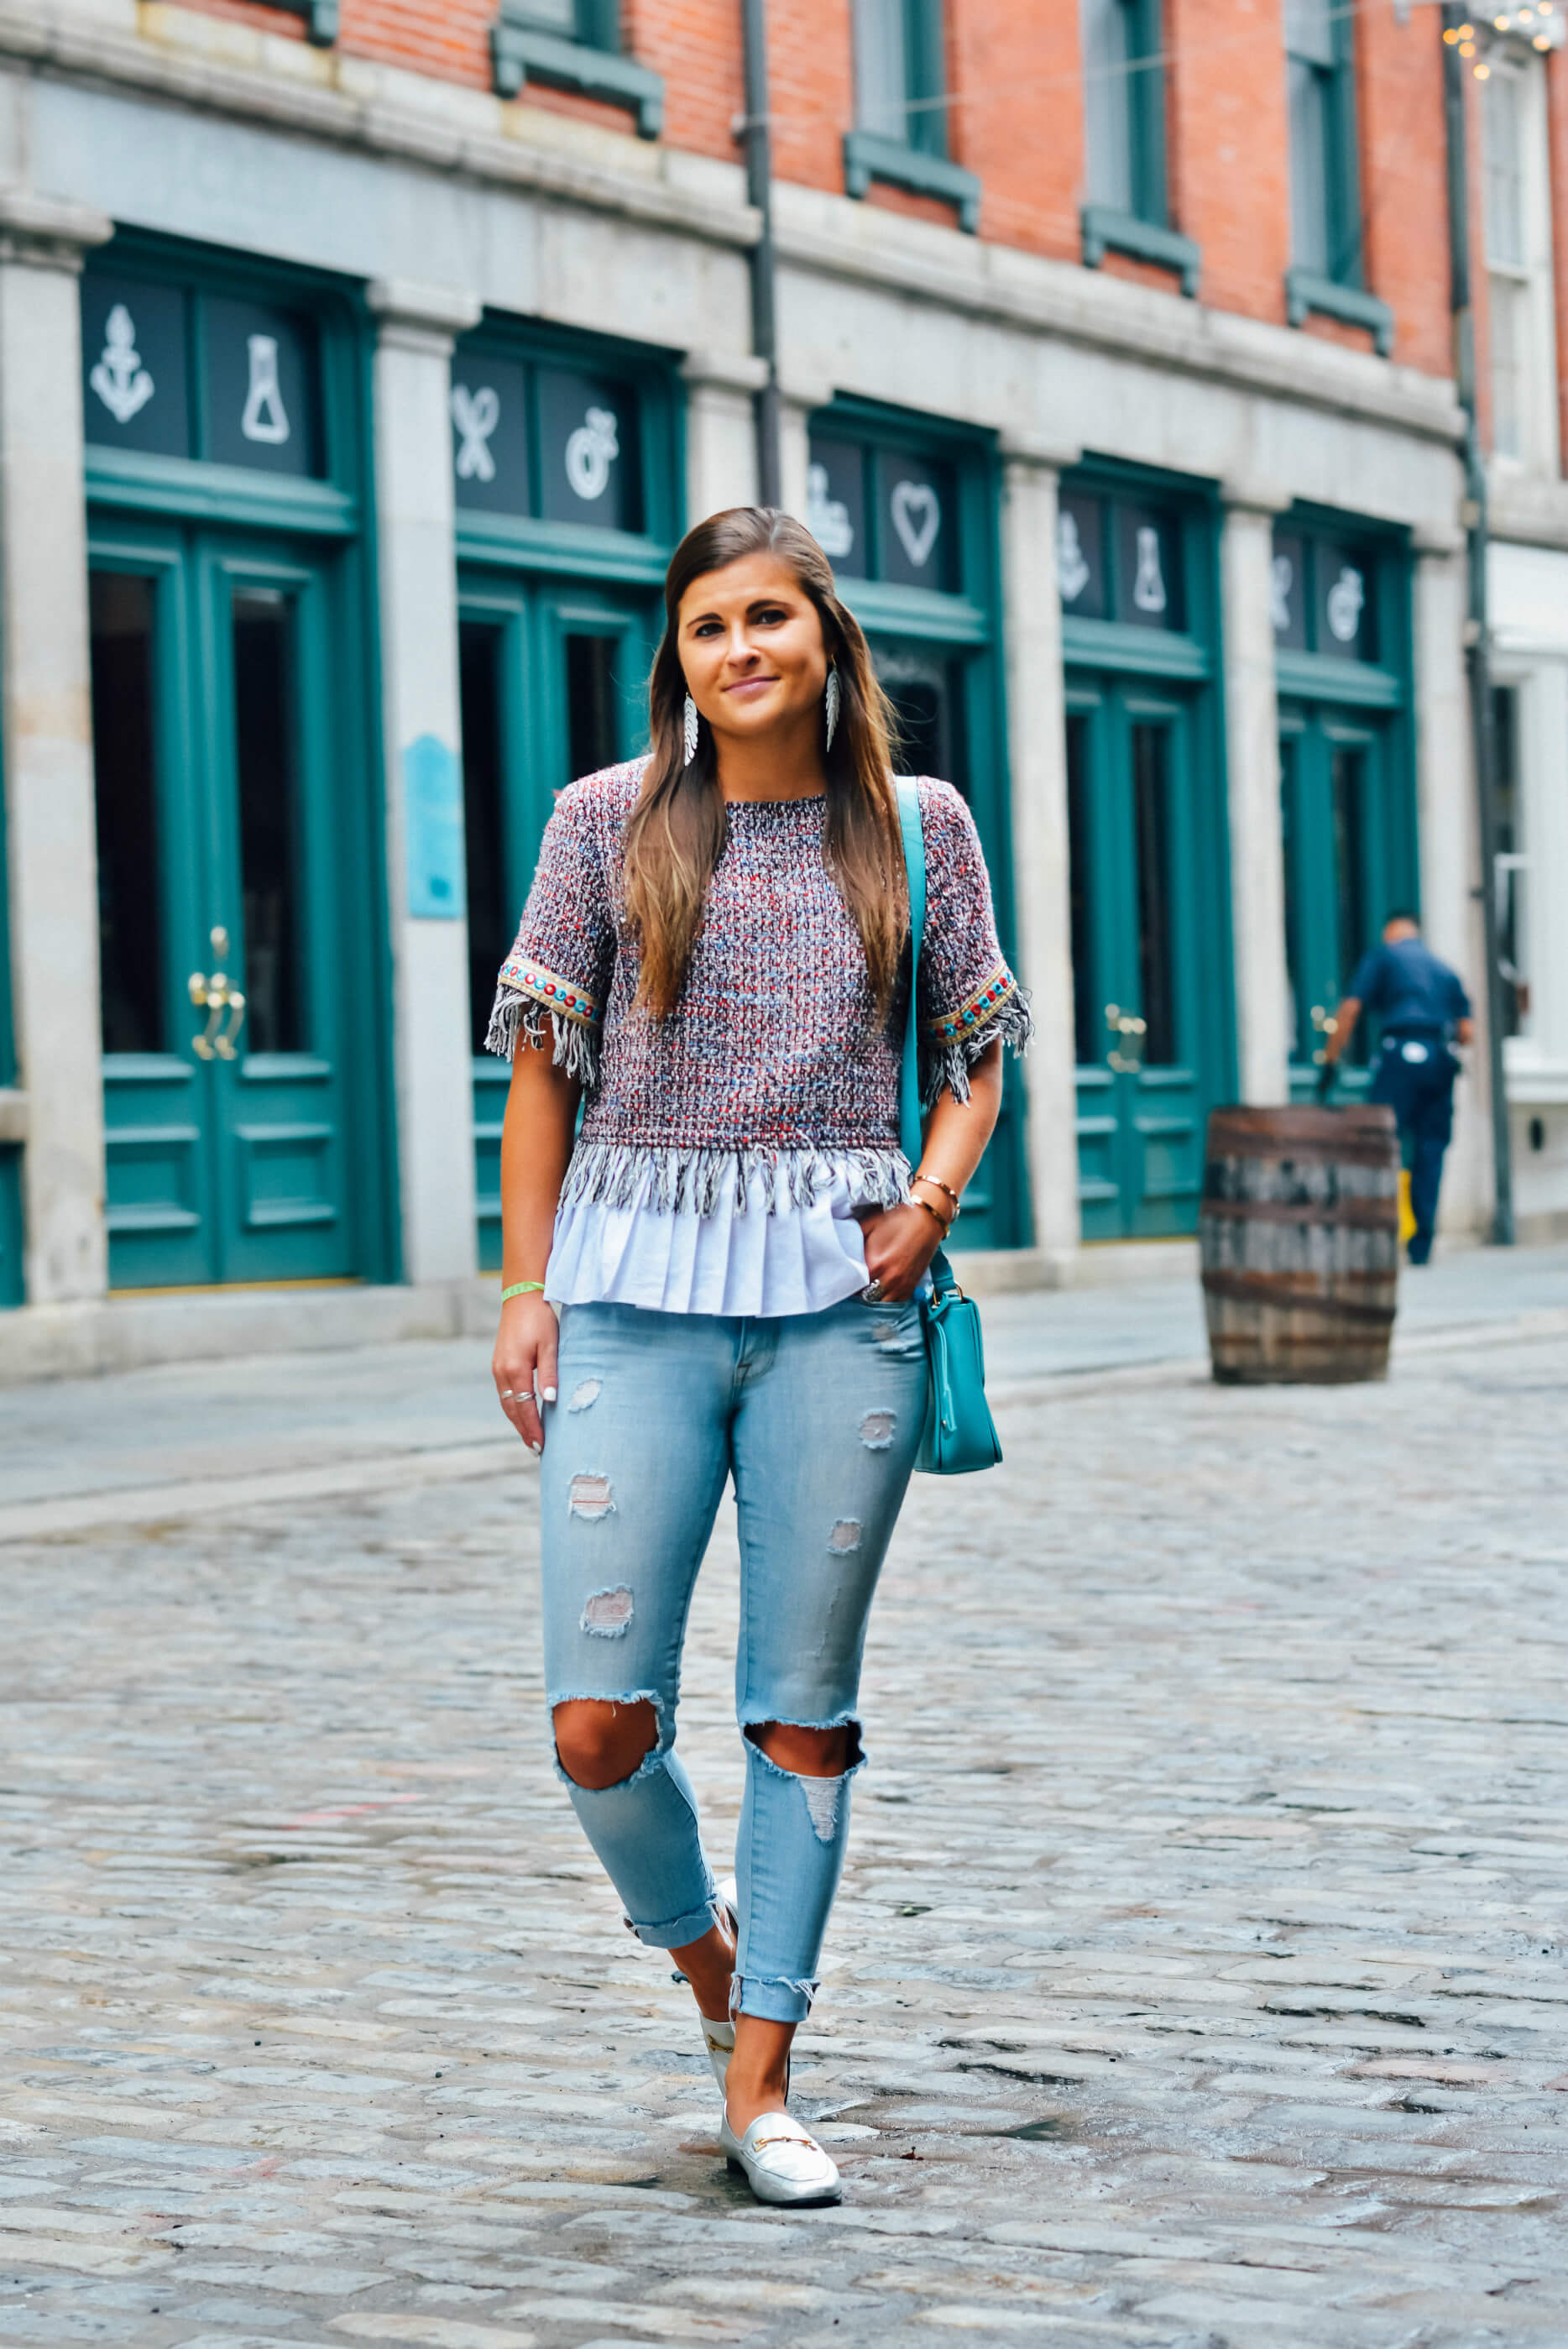 How To Pose Confidently For Street Style Photos, NYC Street Style, Fall Outfit Idea, Tilden of To Be Bright